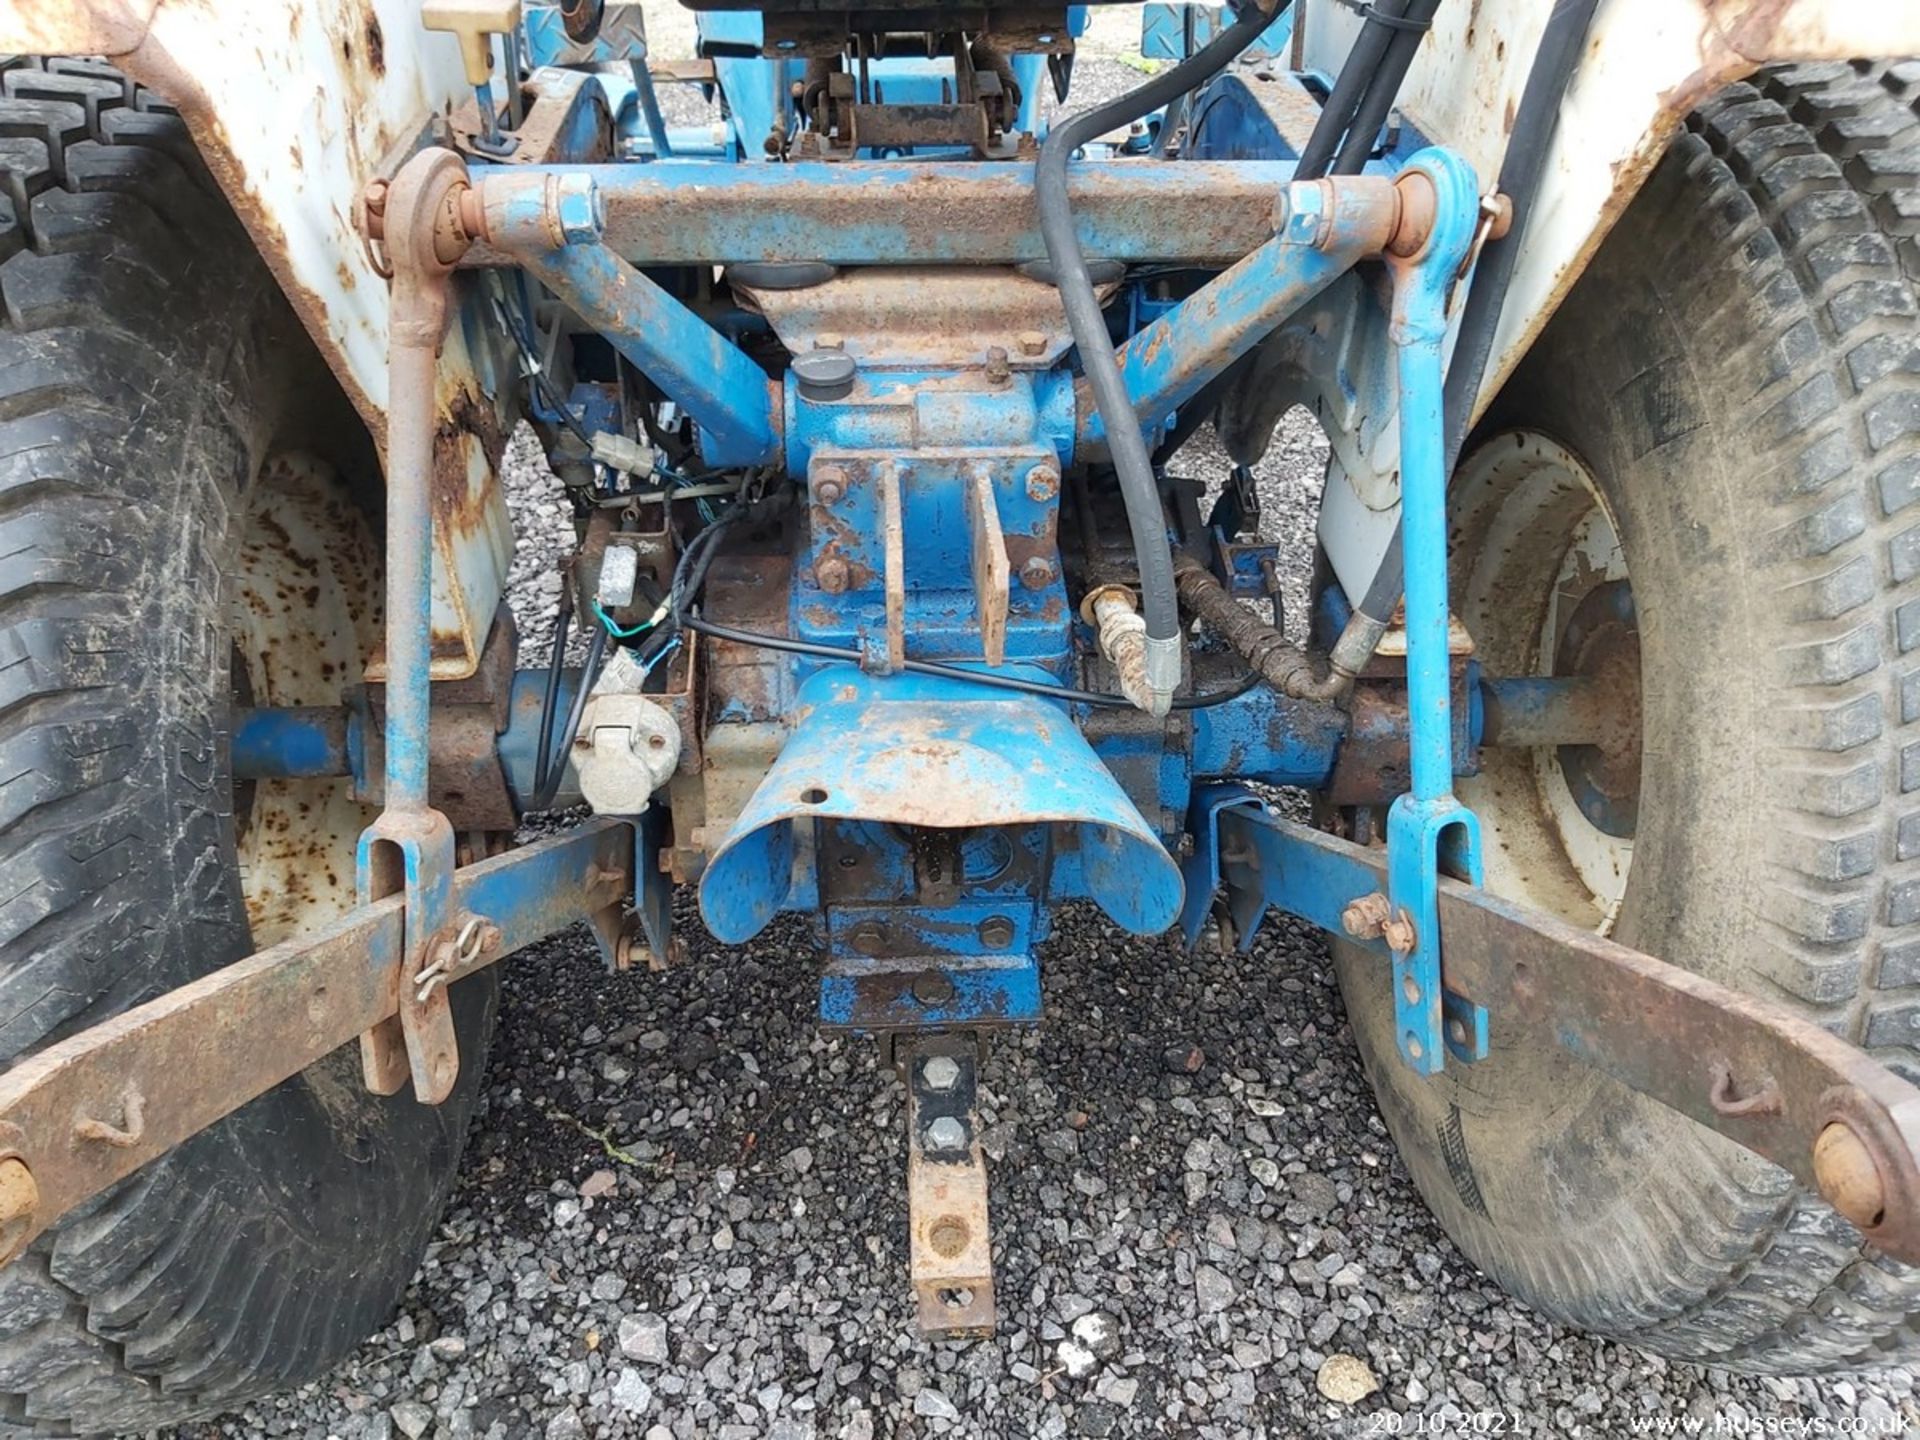 FORD 1520 COMPACT 4WD TRACTOR C.W ROLL BAR 2274HRS SRD PTO & HYDRAULICS WORKING 3 LEVER SPOOL VALVE - Image 4 of 5